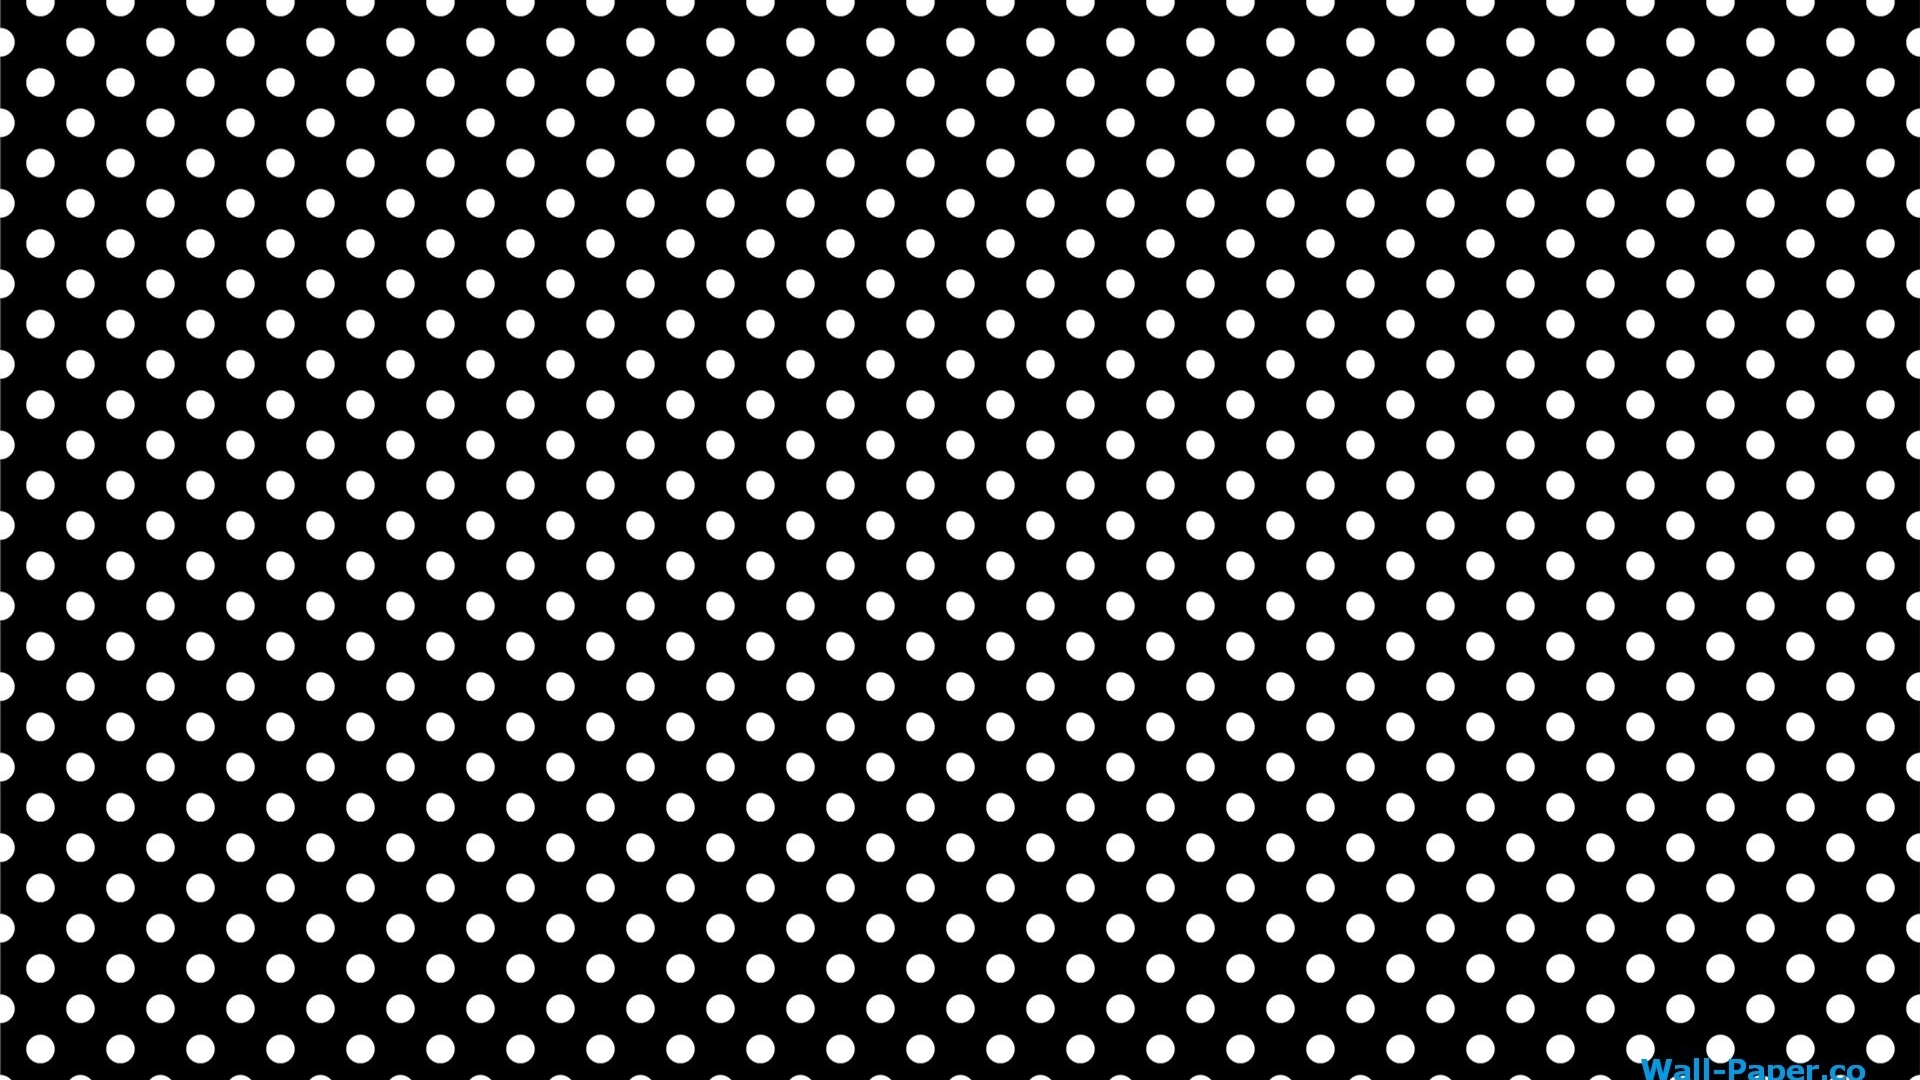 White Dots On Black Background Wallpaper In Textures